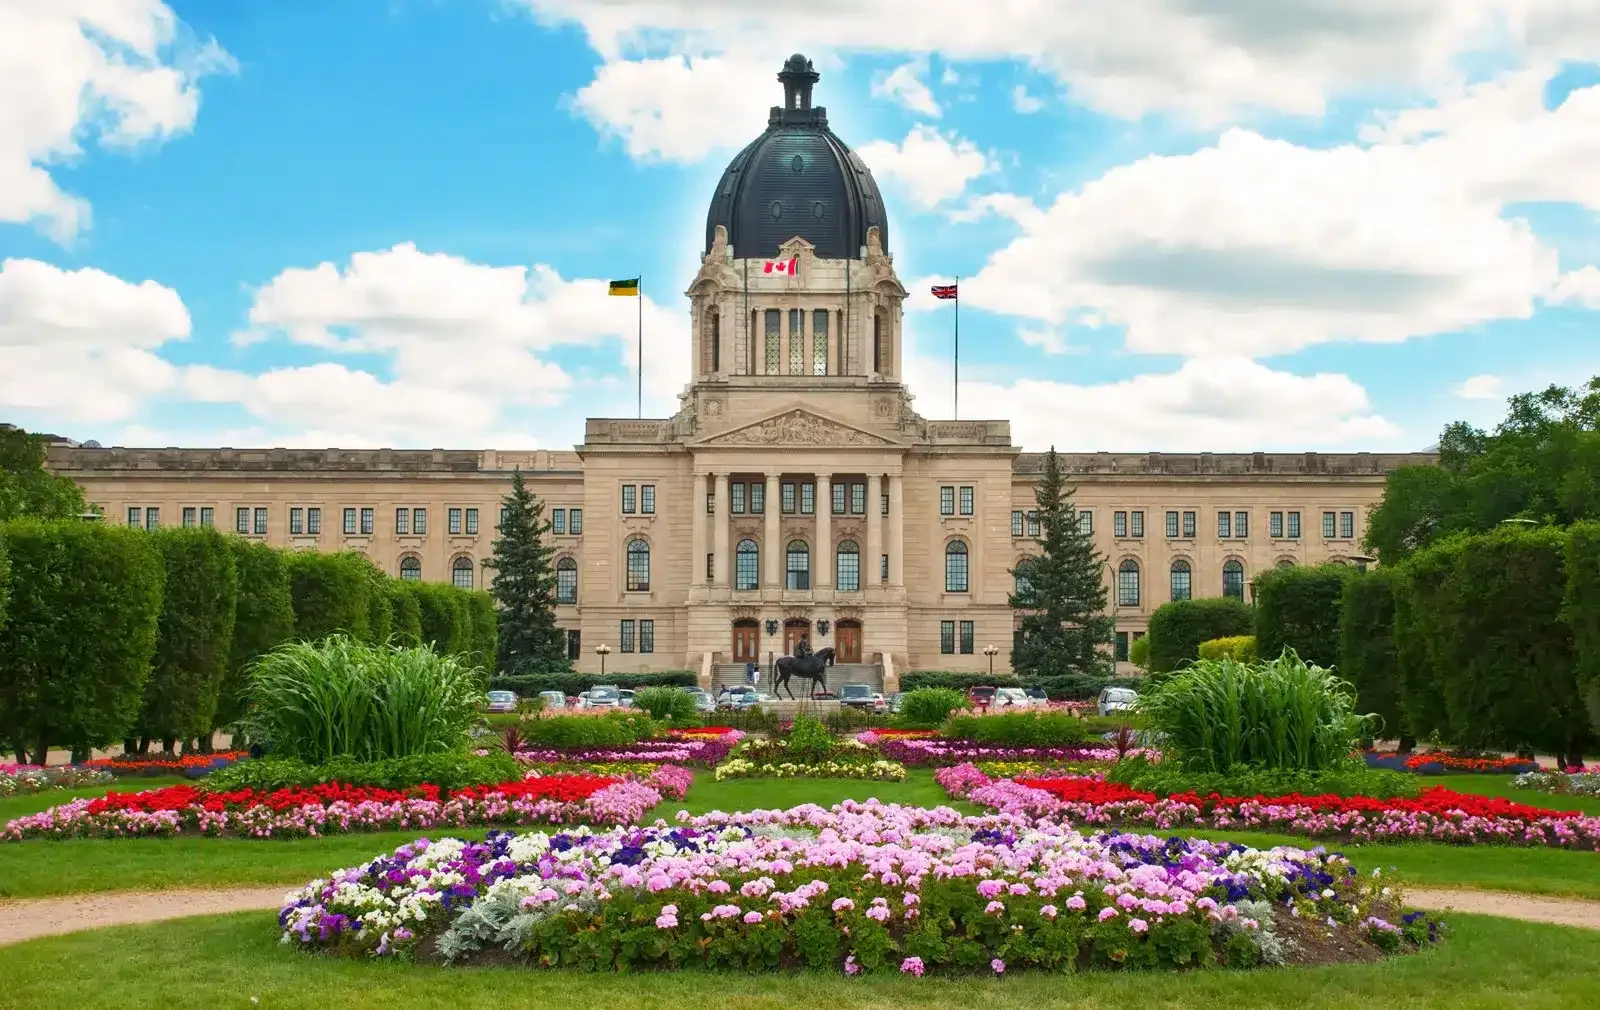 Saskatchewan to End Carbon Tax on Natural Gas & Electric Heating